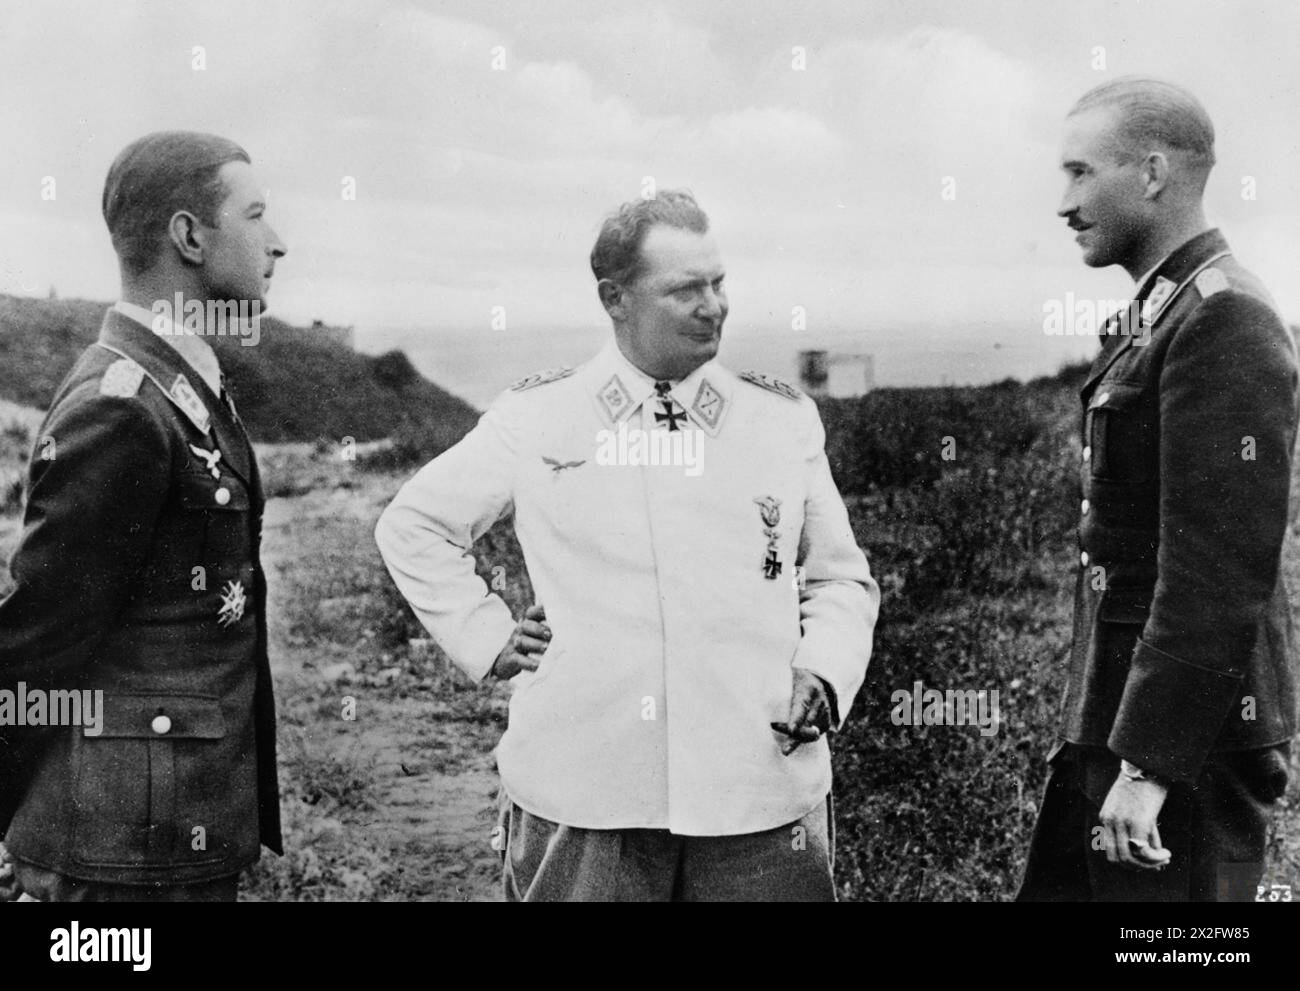 THE BATTLE OF BRITAIN 1940 - Major Werner Mölders and Major Adolf Galland, two leading fighter aces of the Luftwaffe during the Battle of Britain, in conversation with Reichsmarschall Hermann Goering (centre) on the French coast, 1940. Original caption - In the battles, which developed in these retaliatory strikes, Major Moelders and Major Galland stood out. The two successful German fighter pilots reported their experiences to Reich Marshal Goering, at a coastal location Göring, Hermann Wilhelm, Galland, Adolf Joseph Ferdinand, Molders, Werner Stock Photo